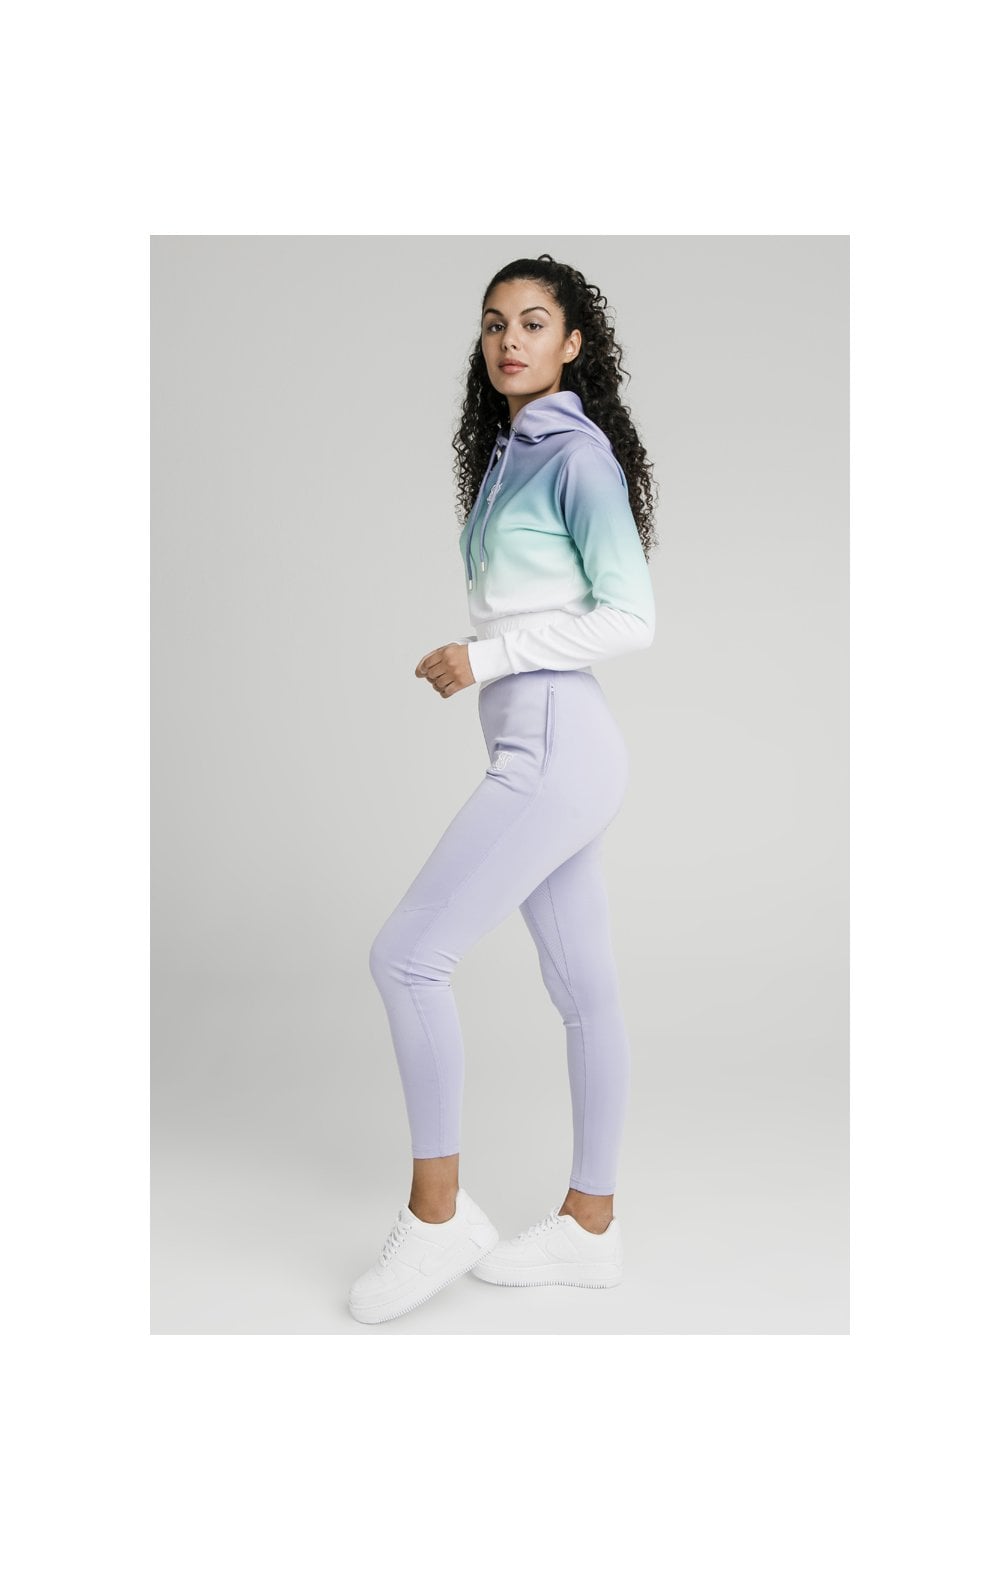 SikSilk Lilac Haze Track Top - Lilac
                    
                        Turquoise & White (4)